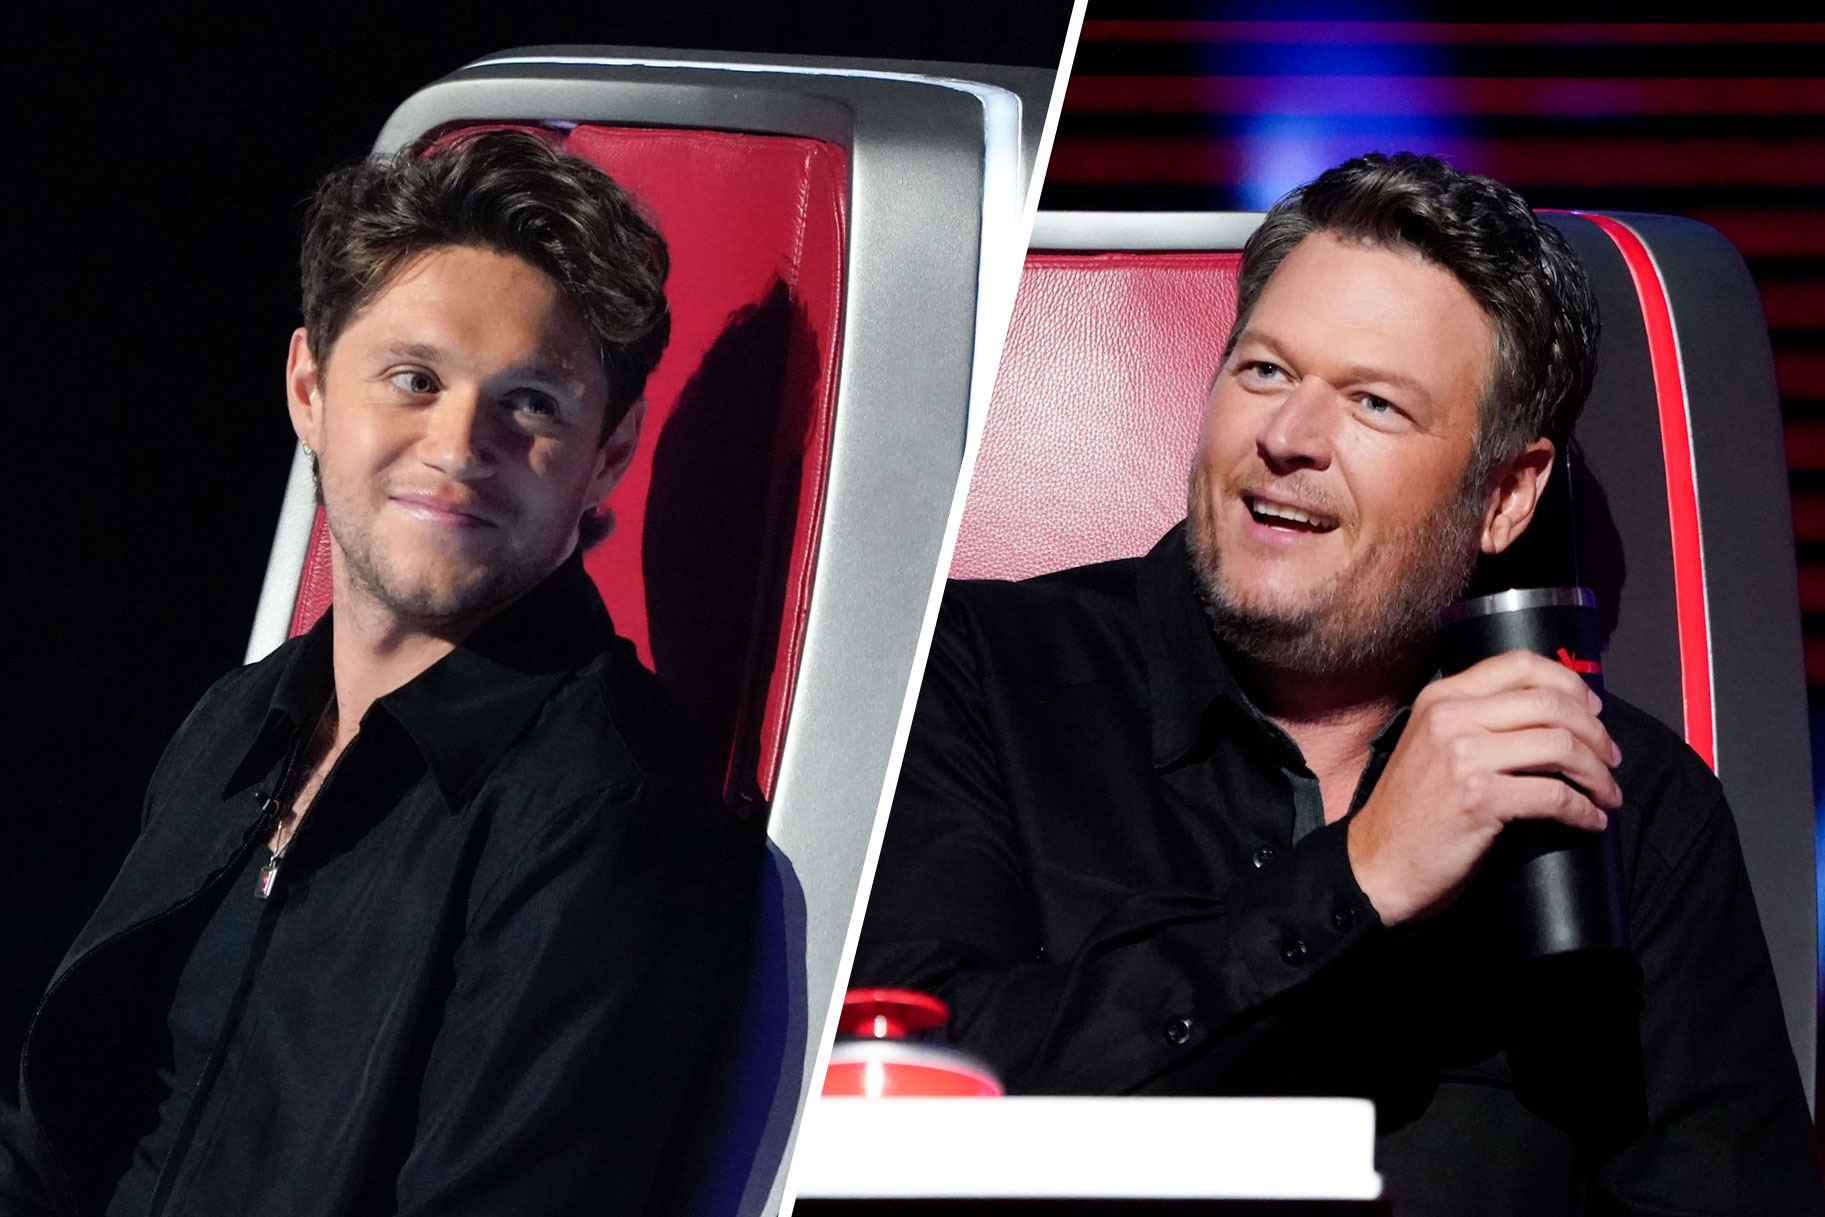 The Voice's Blake Shelton and Niall Horan